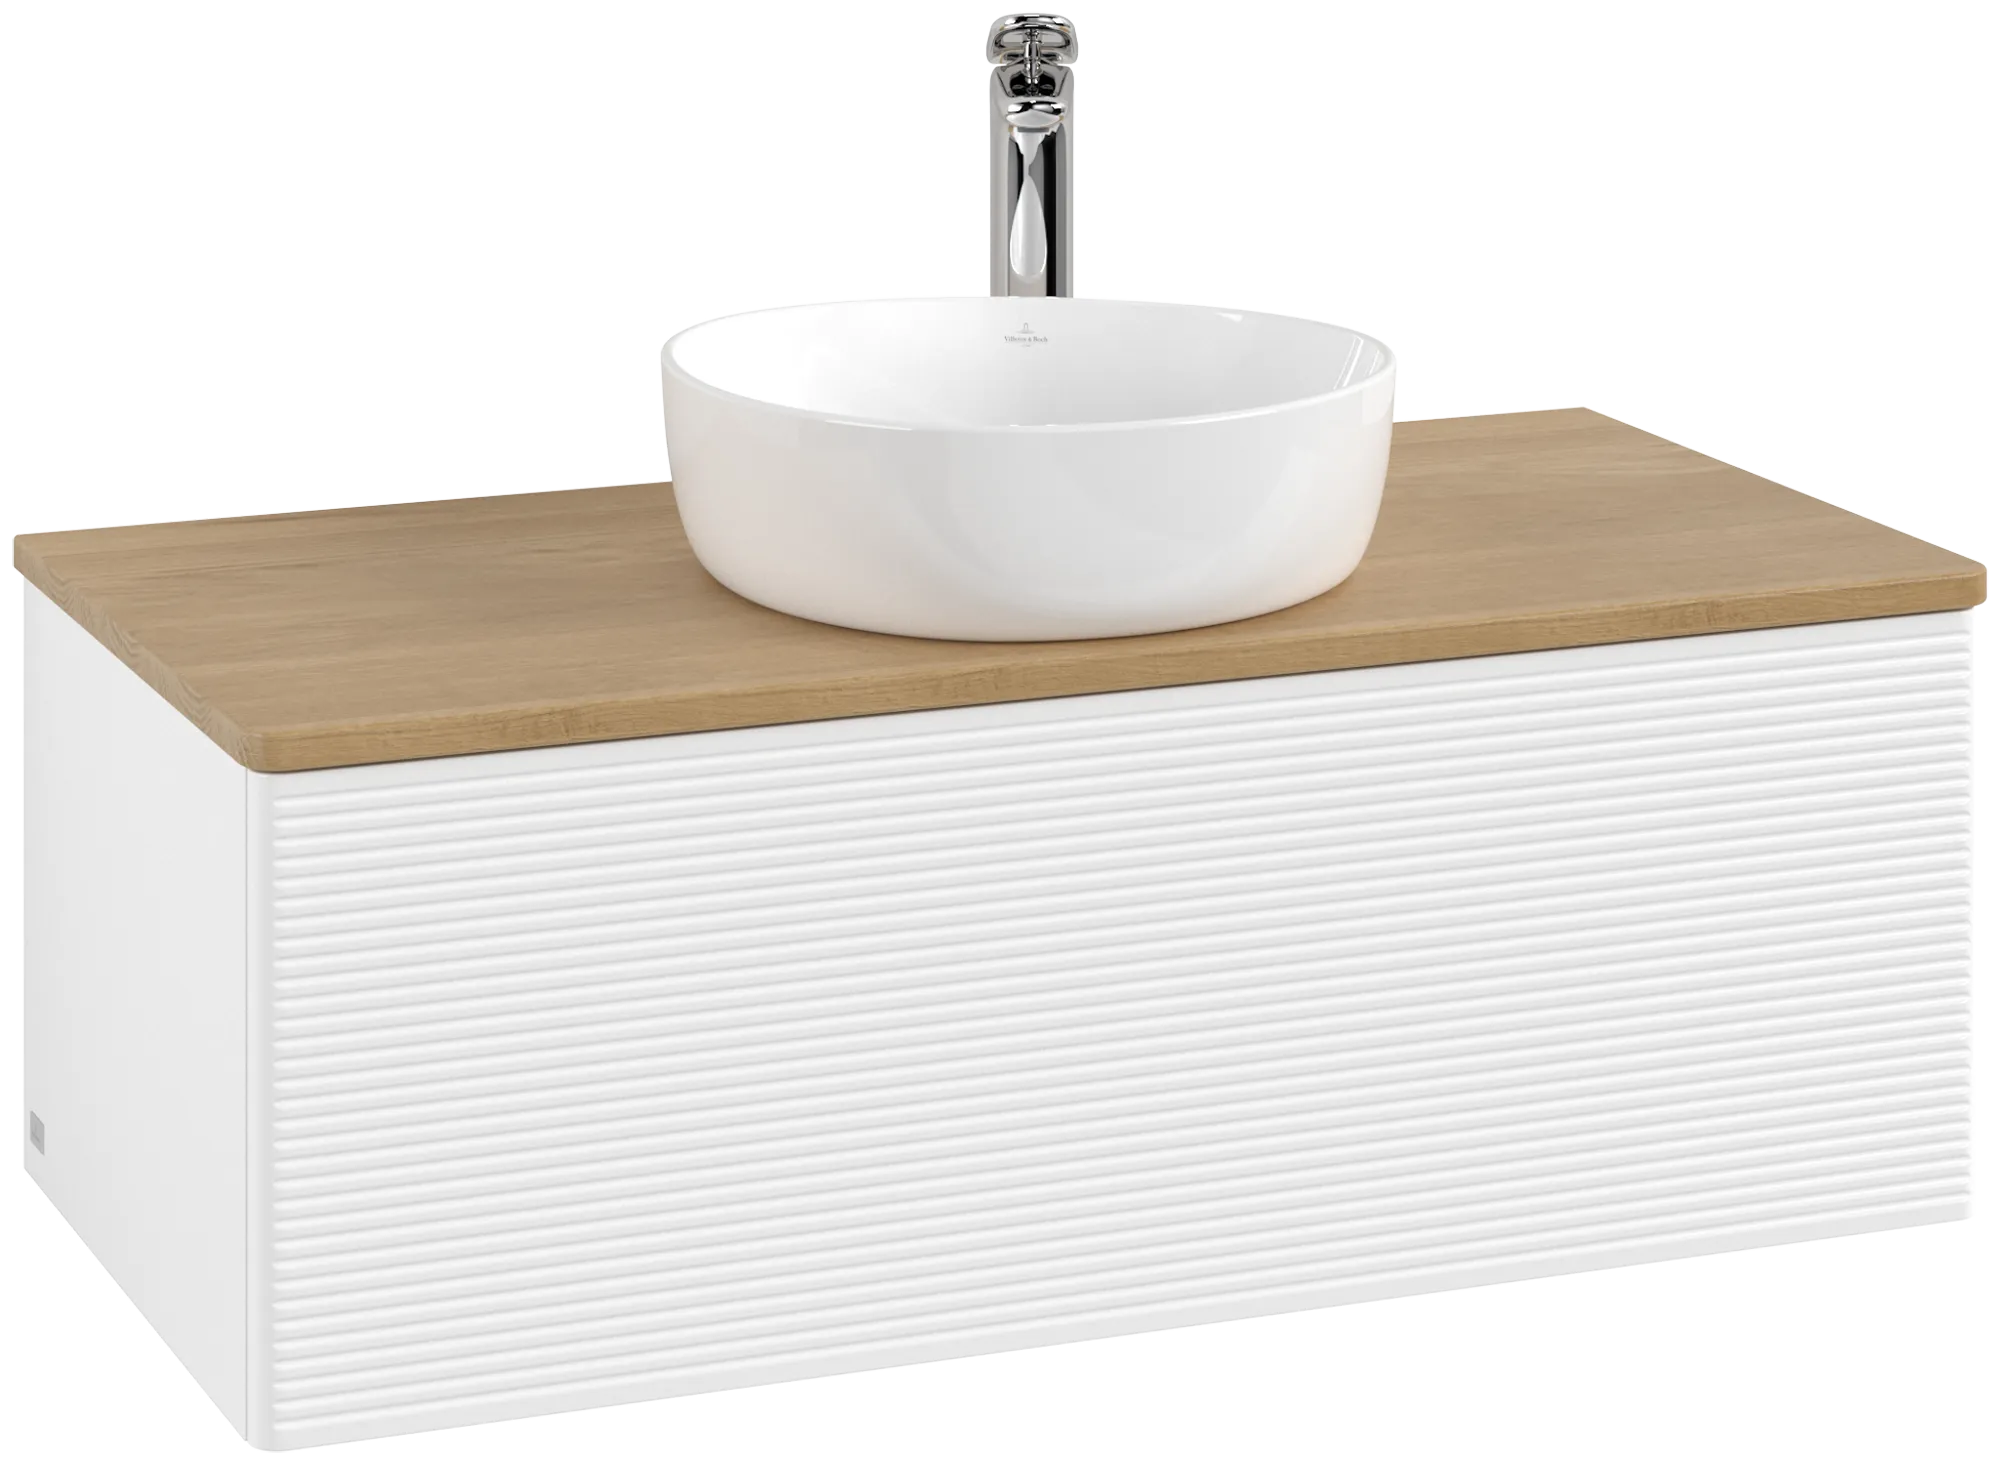 Picture of VILLEROY BOCH Antao Vanity unit, with lighting, 1 pull-out compartment, 1000 x 360 x 500 mm, Front with grain texture, White Matt Lacquer / Honey Oak #L31151MT